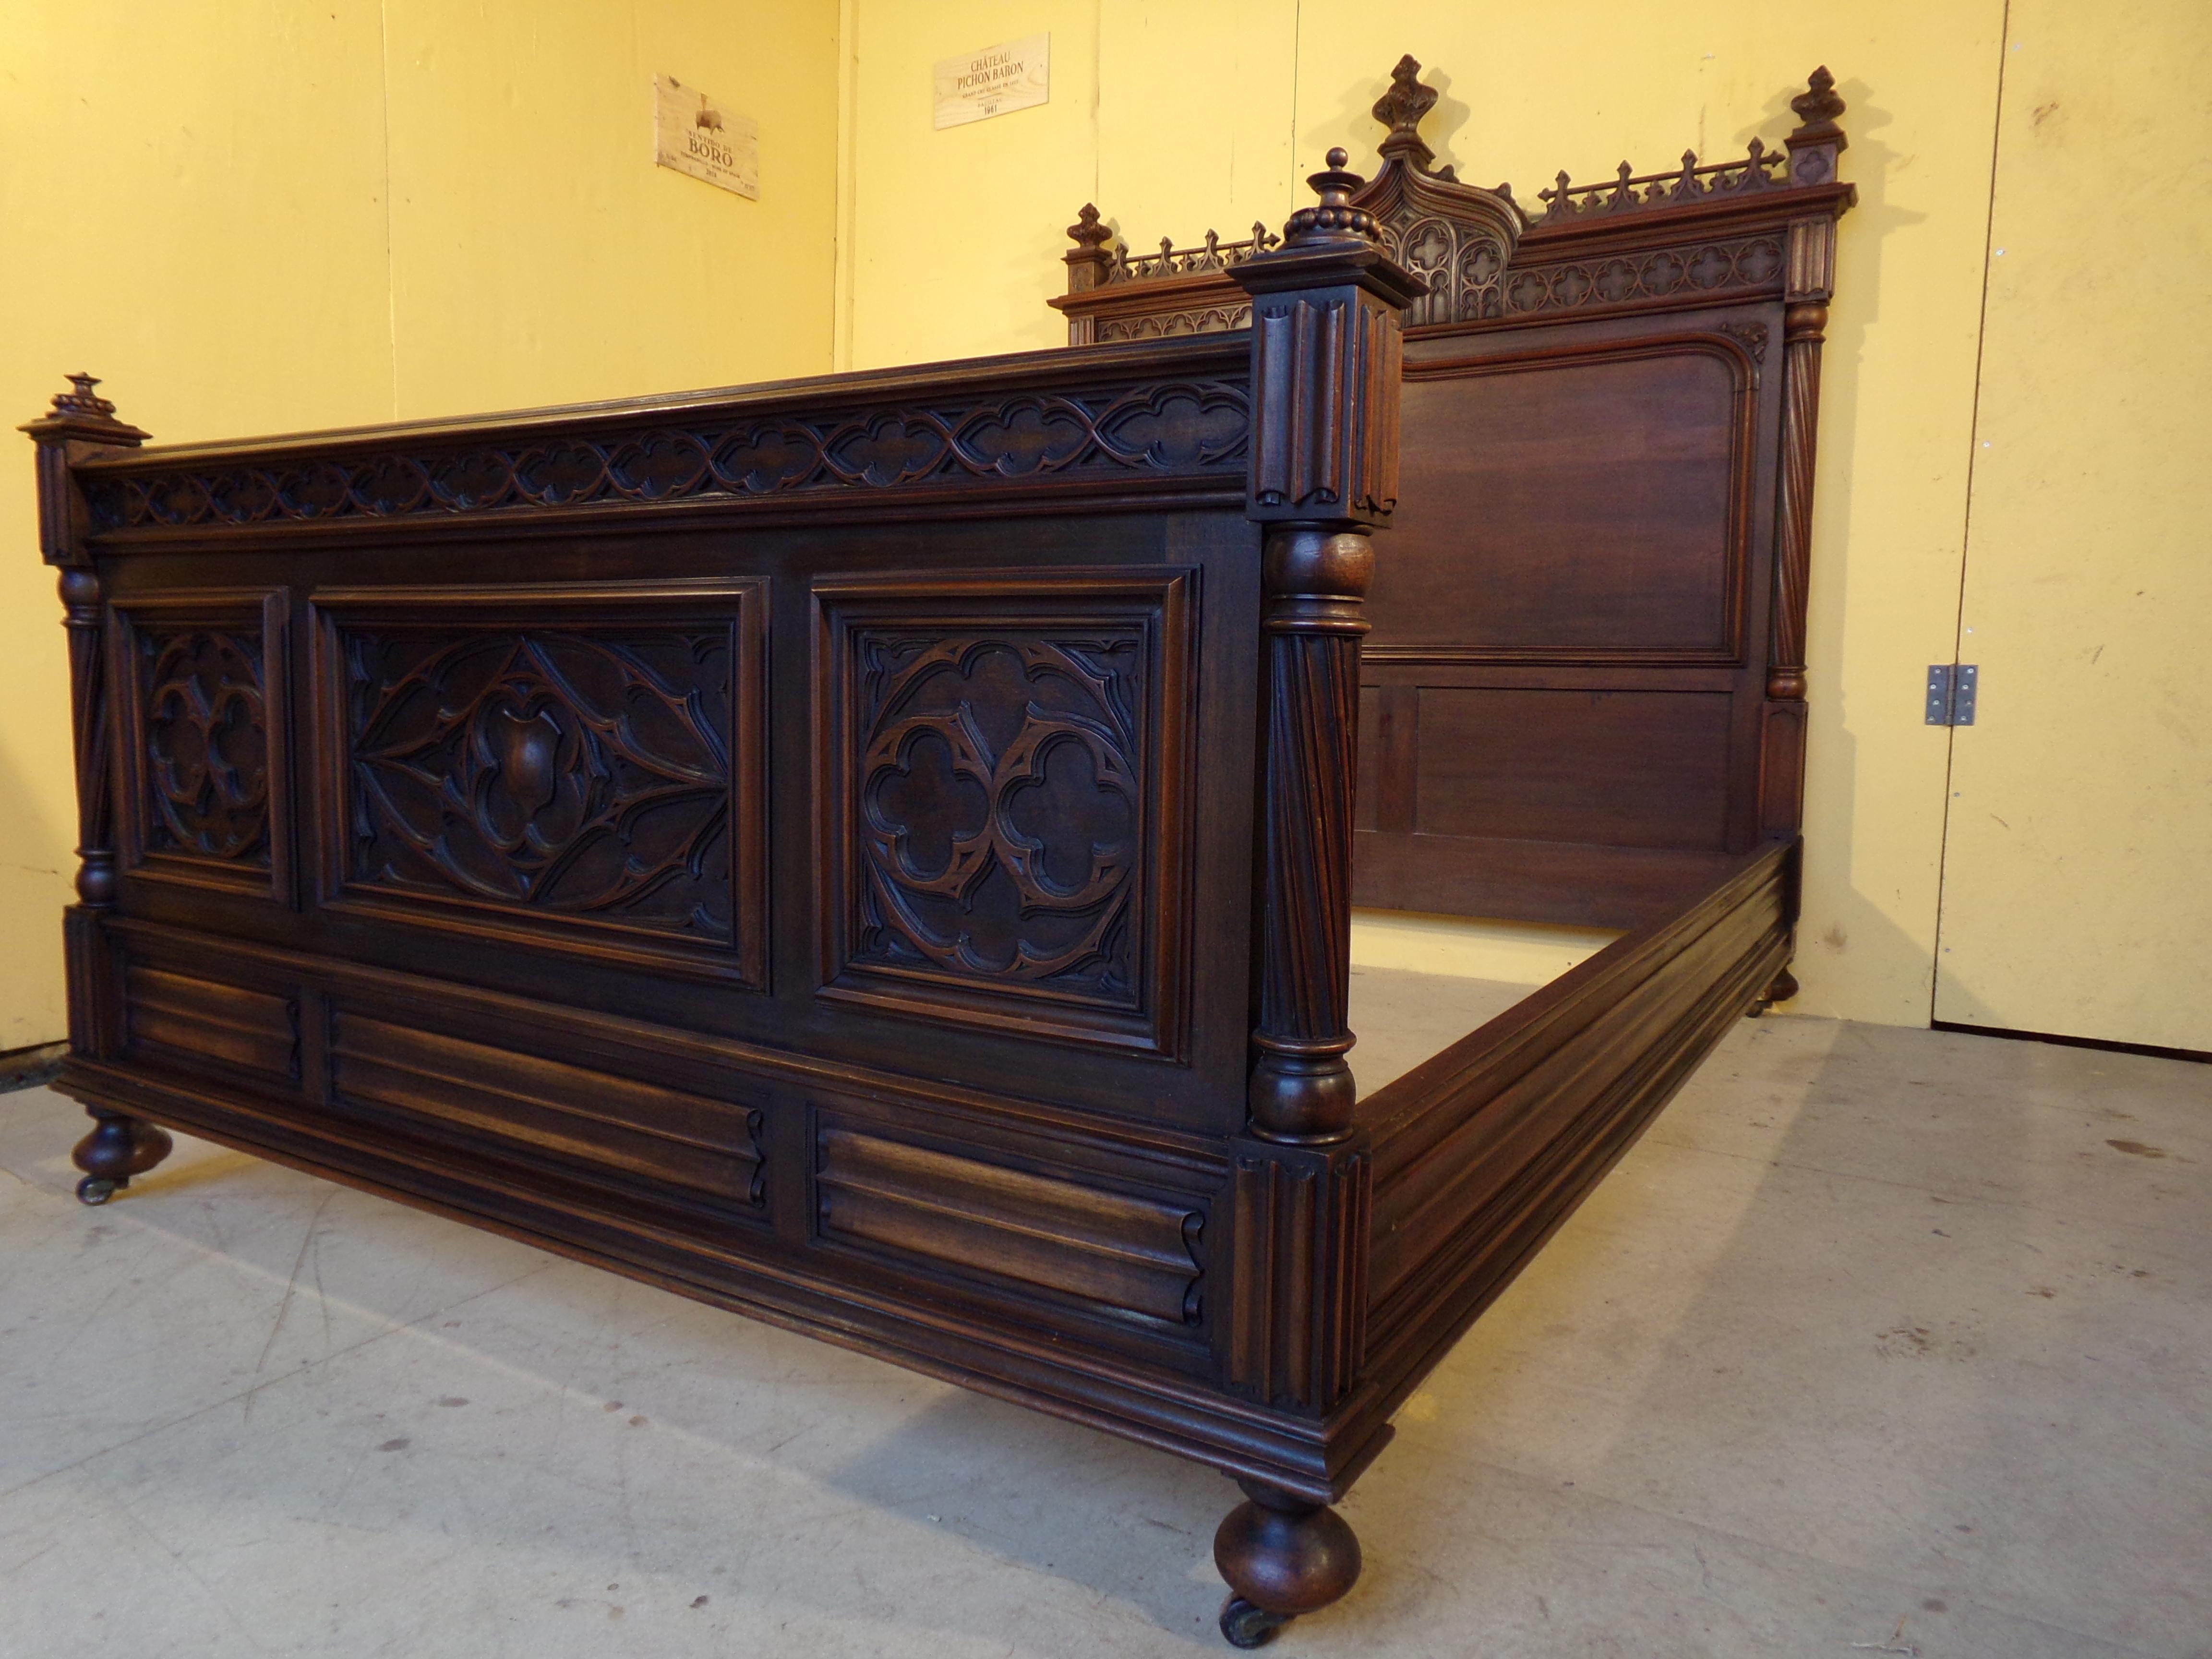 An outstanding quality hand carved walnut Gothic Revival double bed circa 1890 in superb original condition both color and cabinet work this fine bed came from a grand property near Bordeaux France where it had been in the same family for over 120